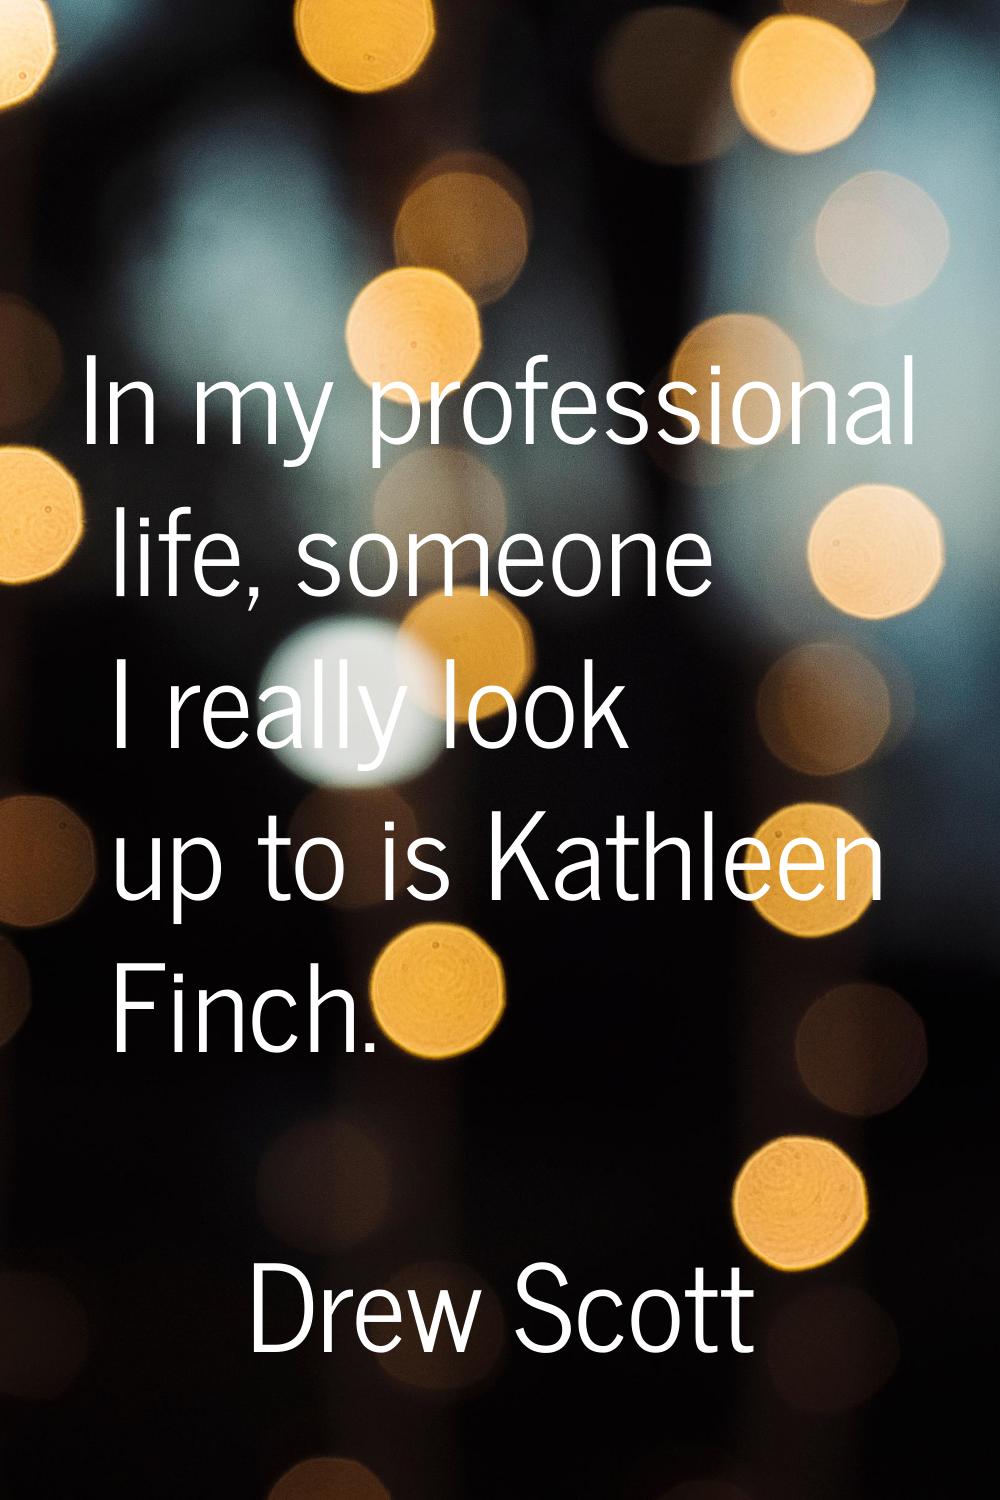 In my professional life, someone I really look up to is Kathleen Finch.